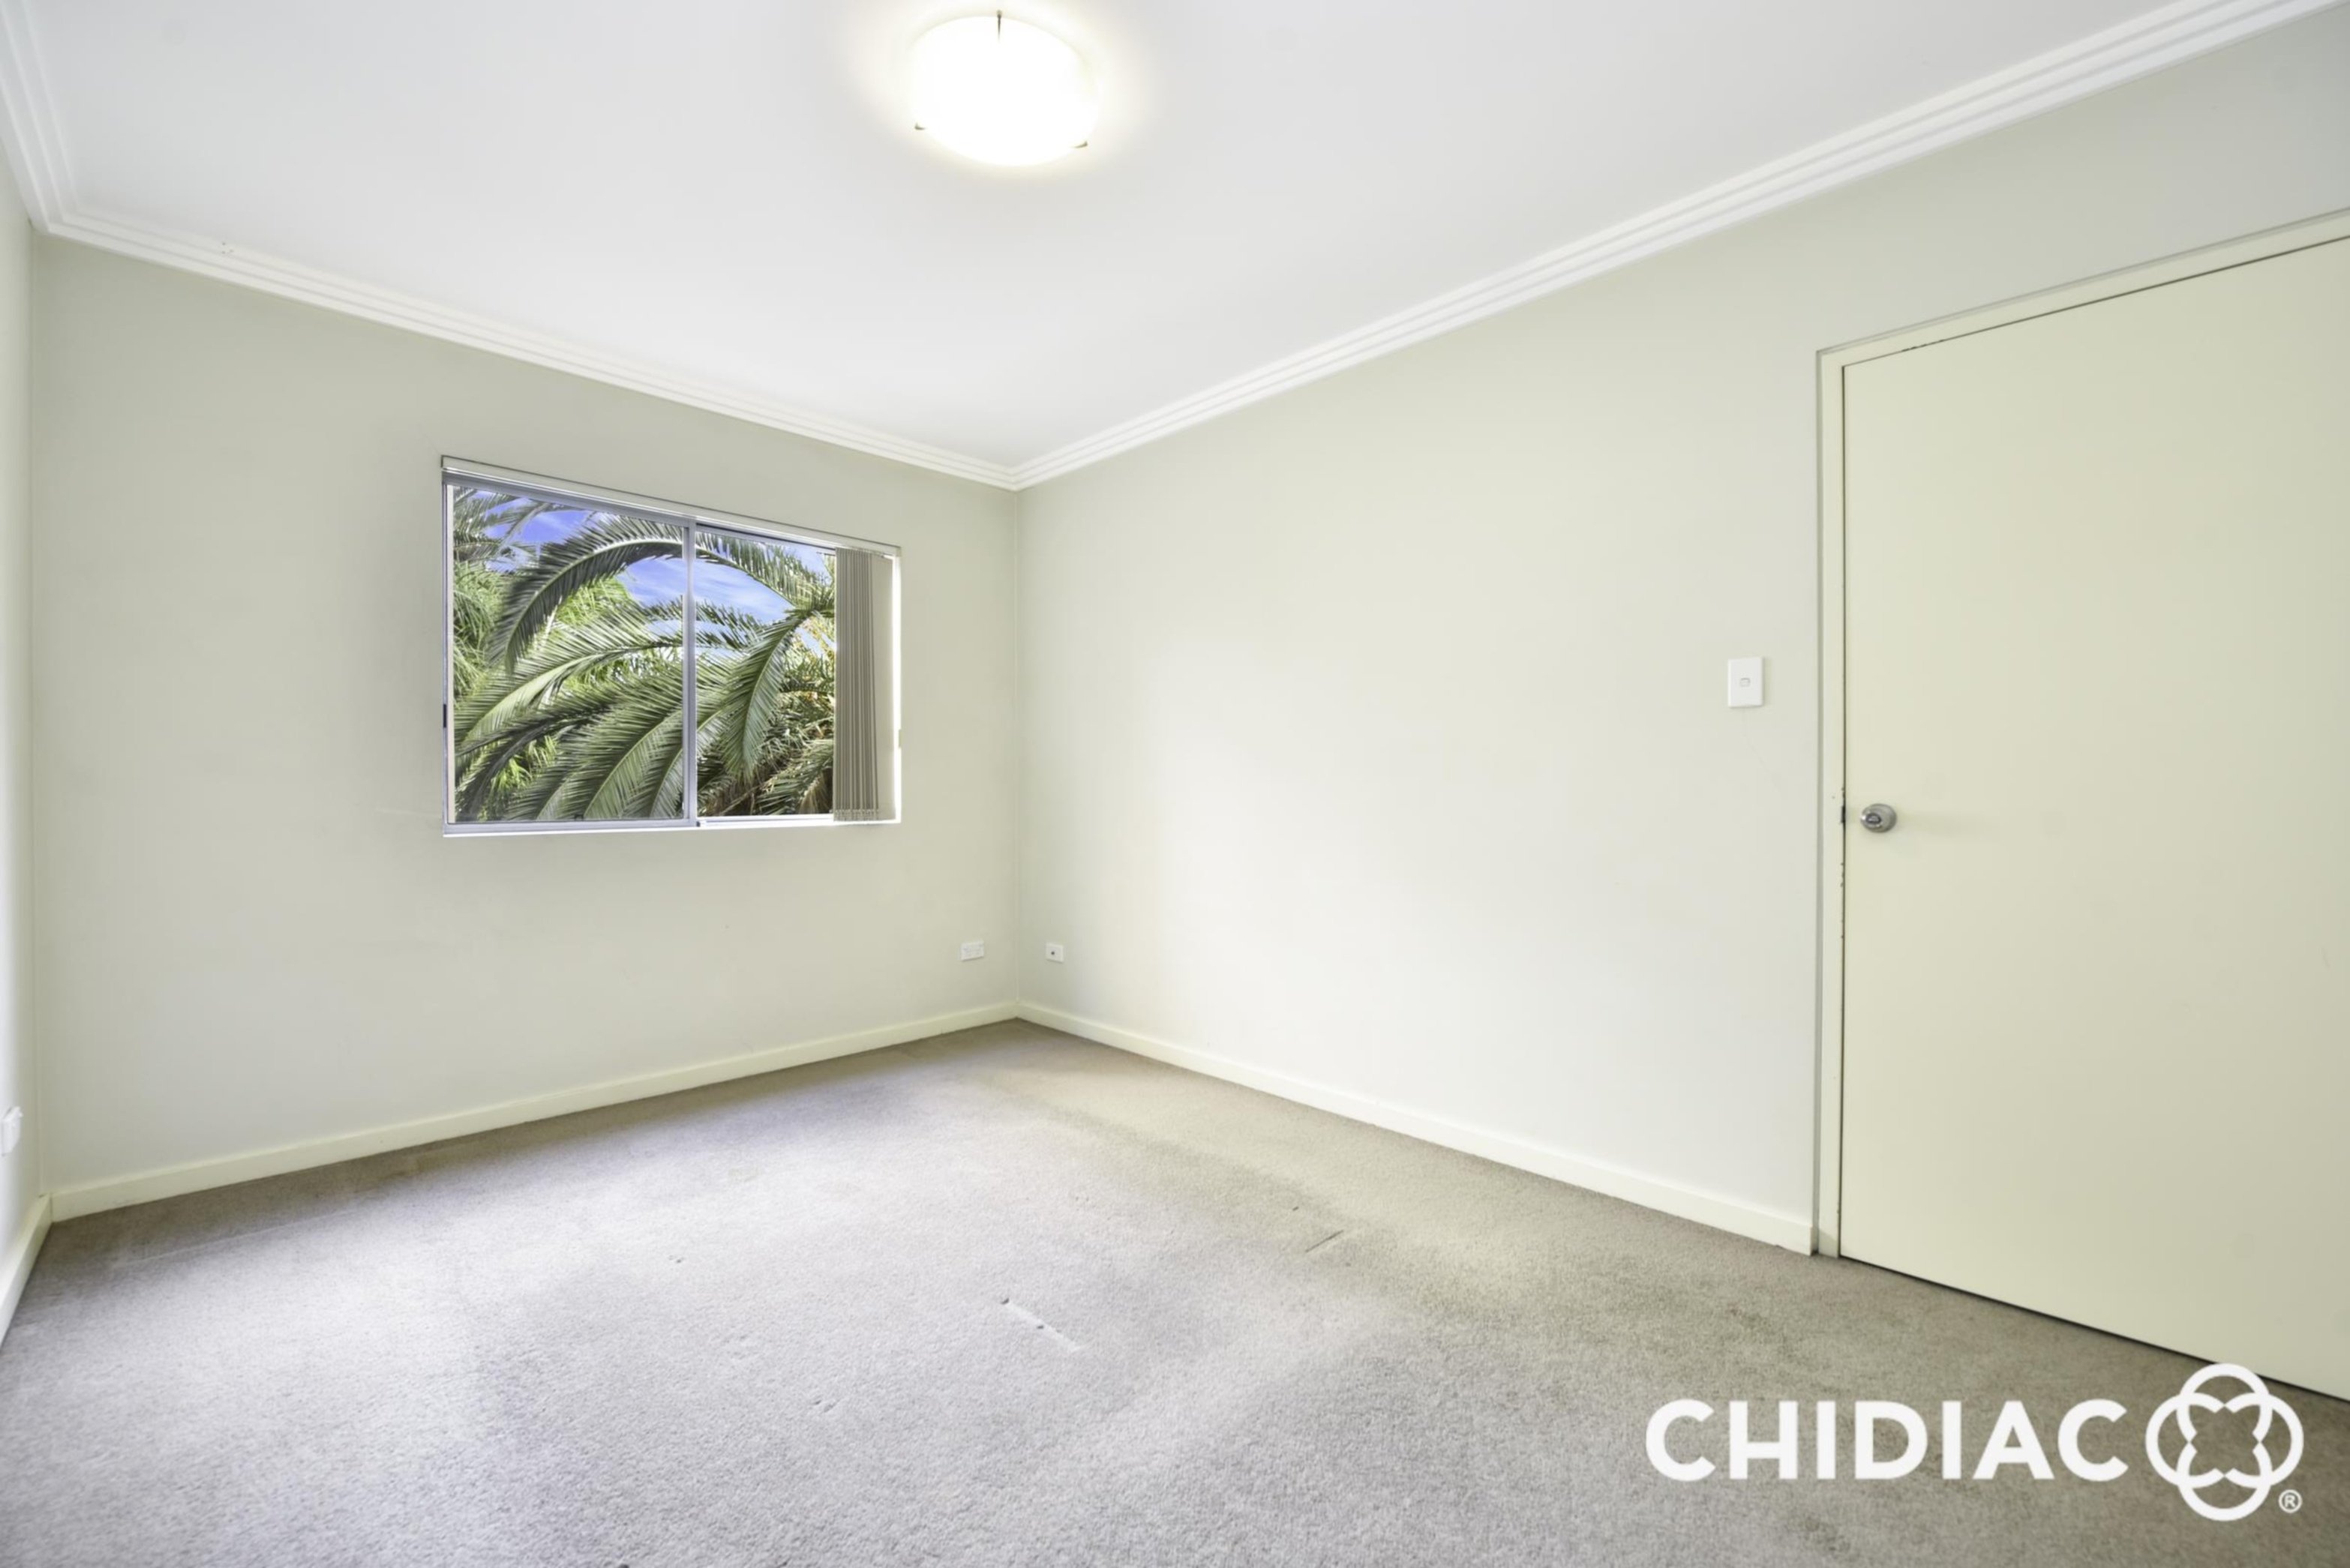 342A Marrickville Road, Marrickville Leased by Chidiac Realty - image 4